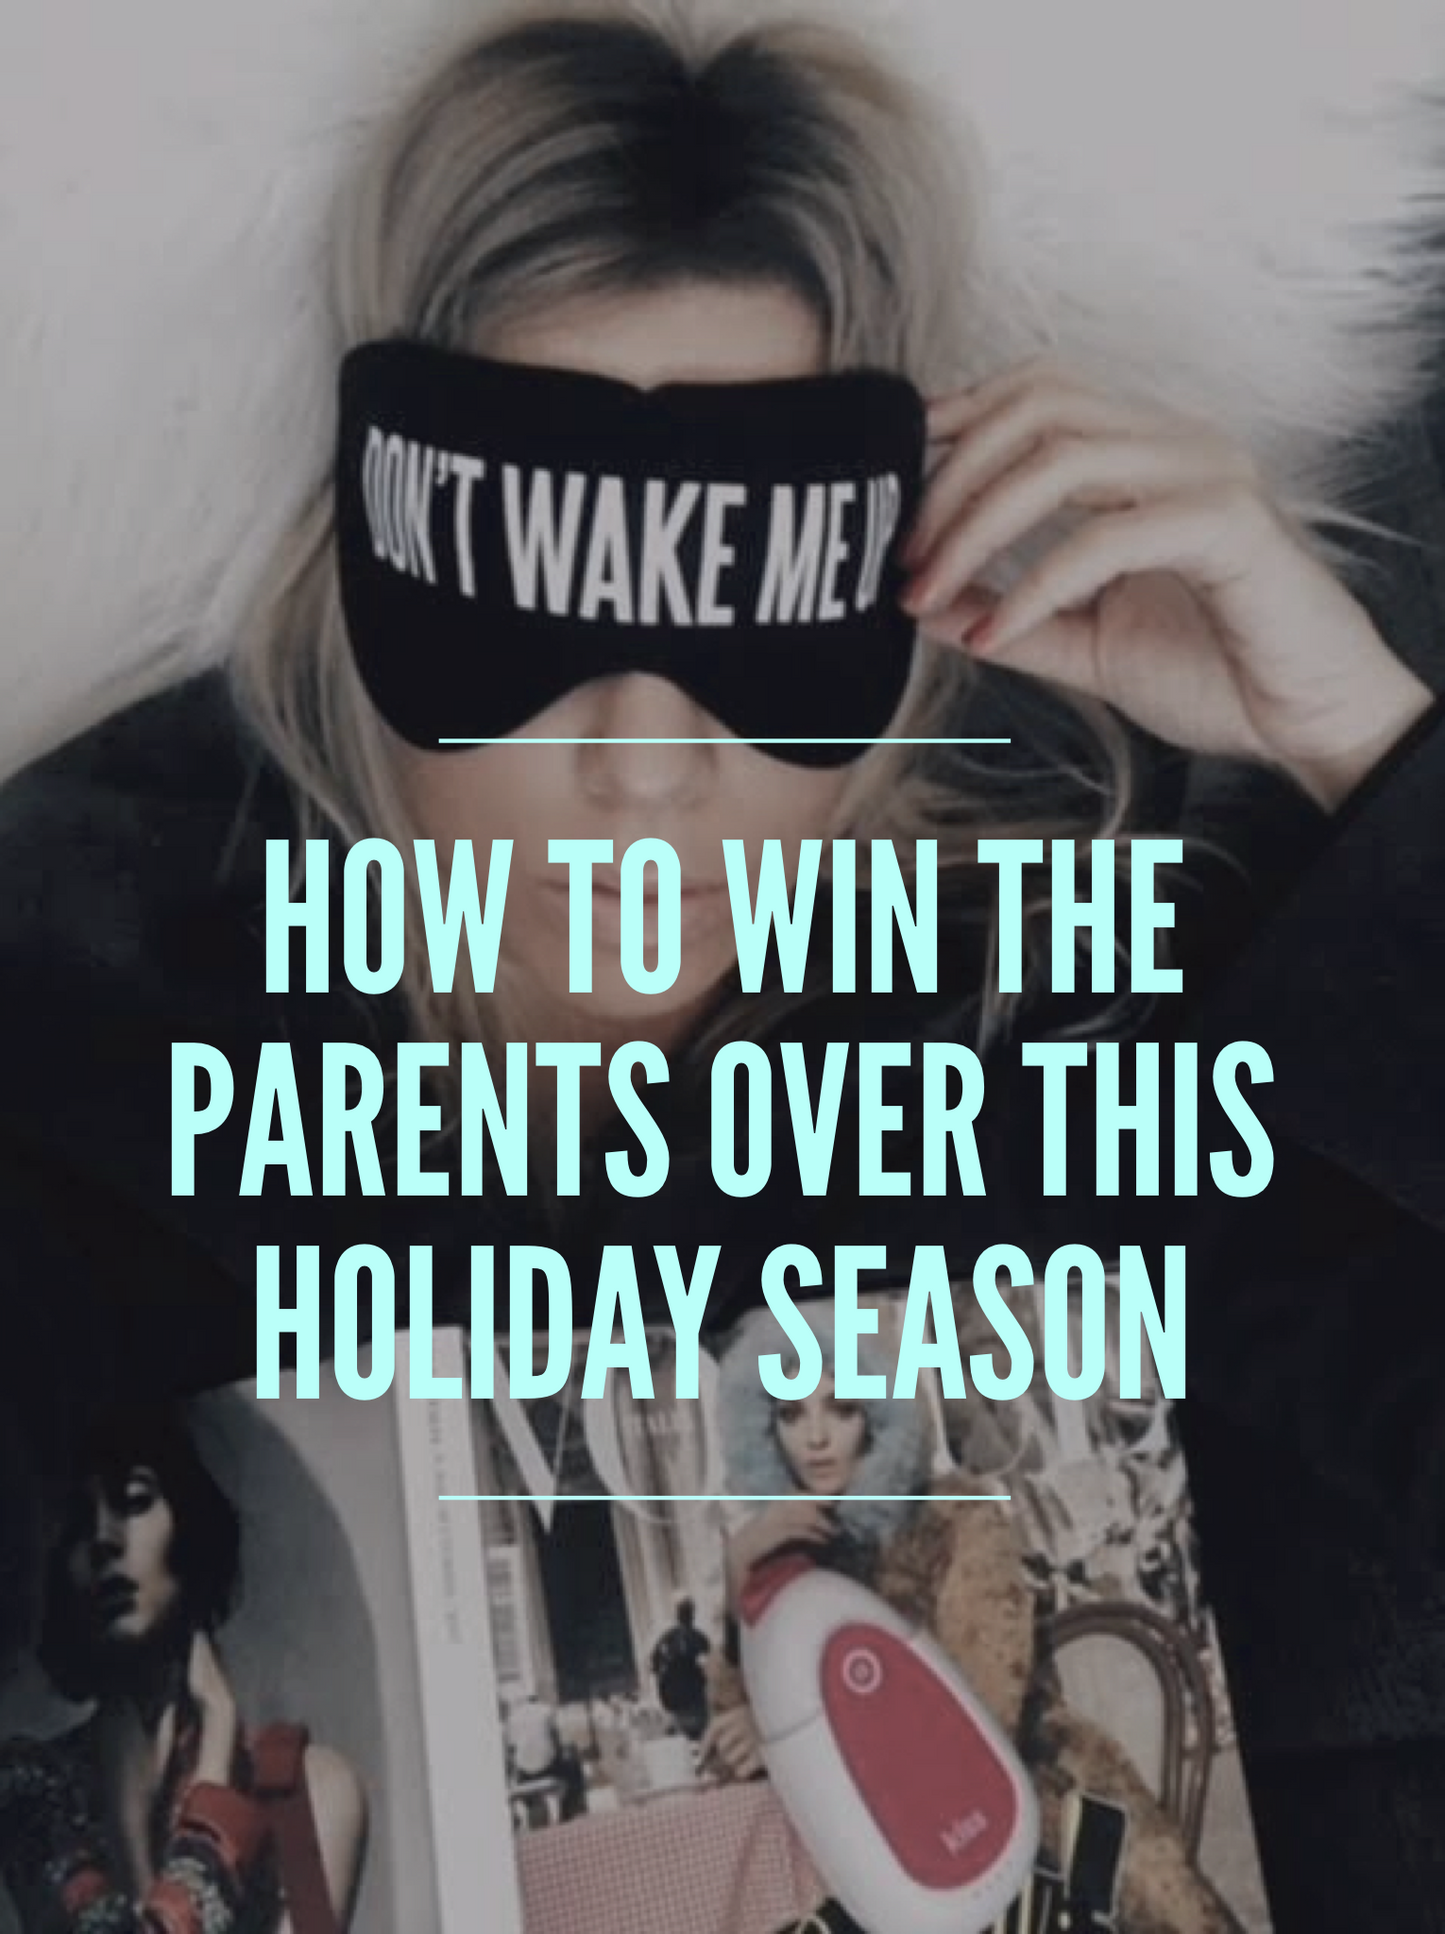 How To Win The Parents Over This Holiday Season